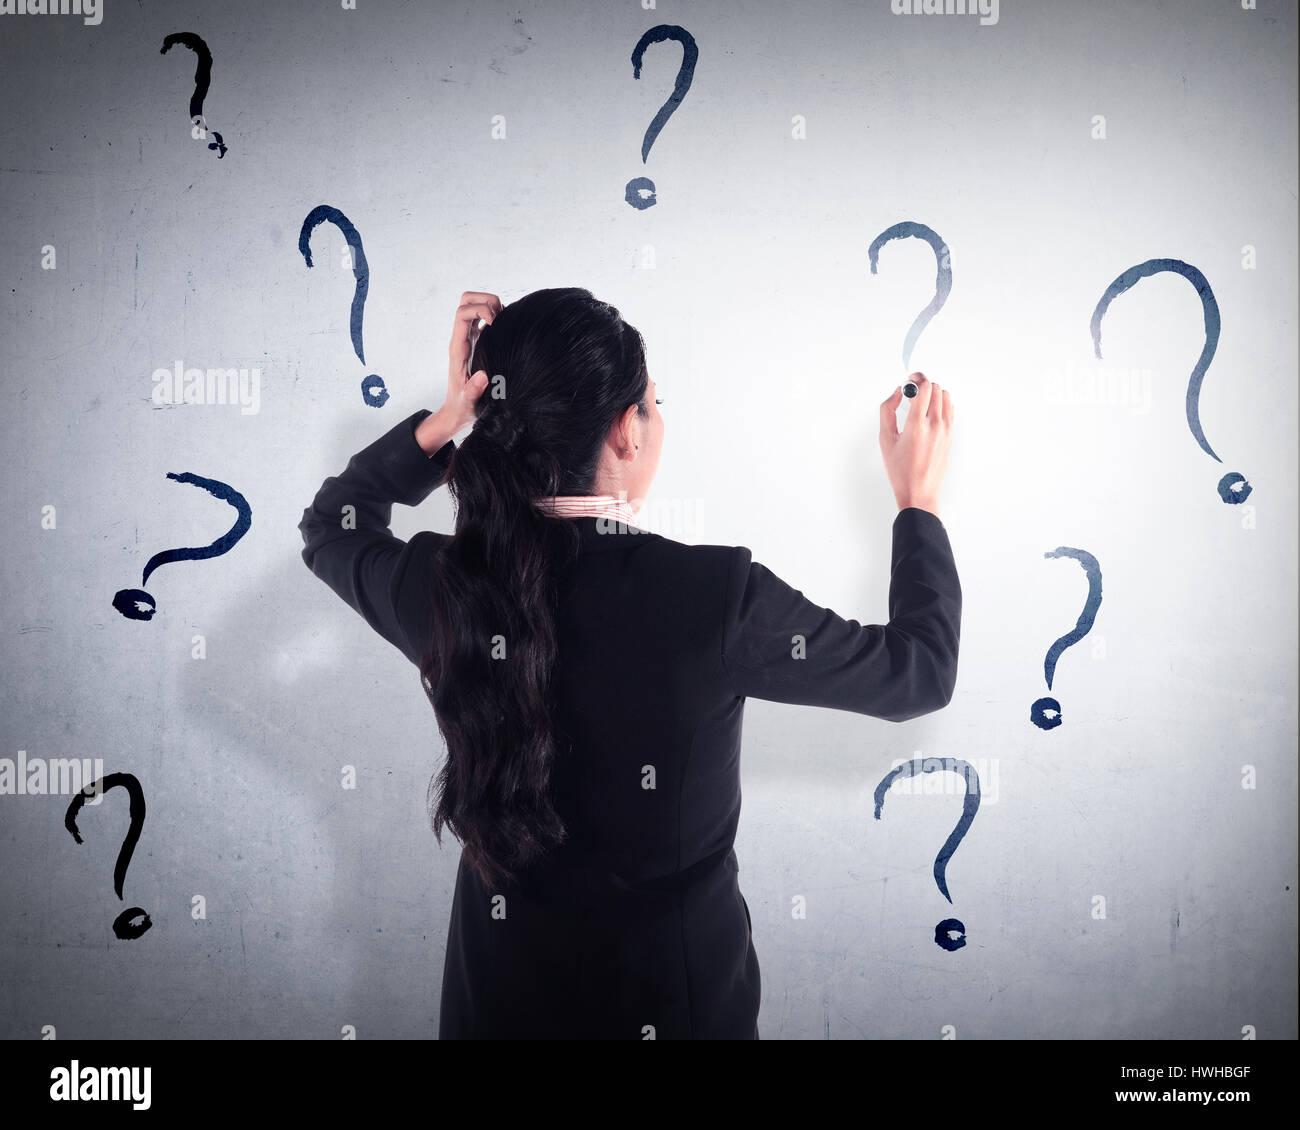 Business woman write question mark on the wall. She dont know what to write Stock Photo